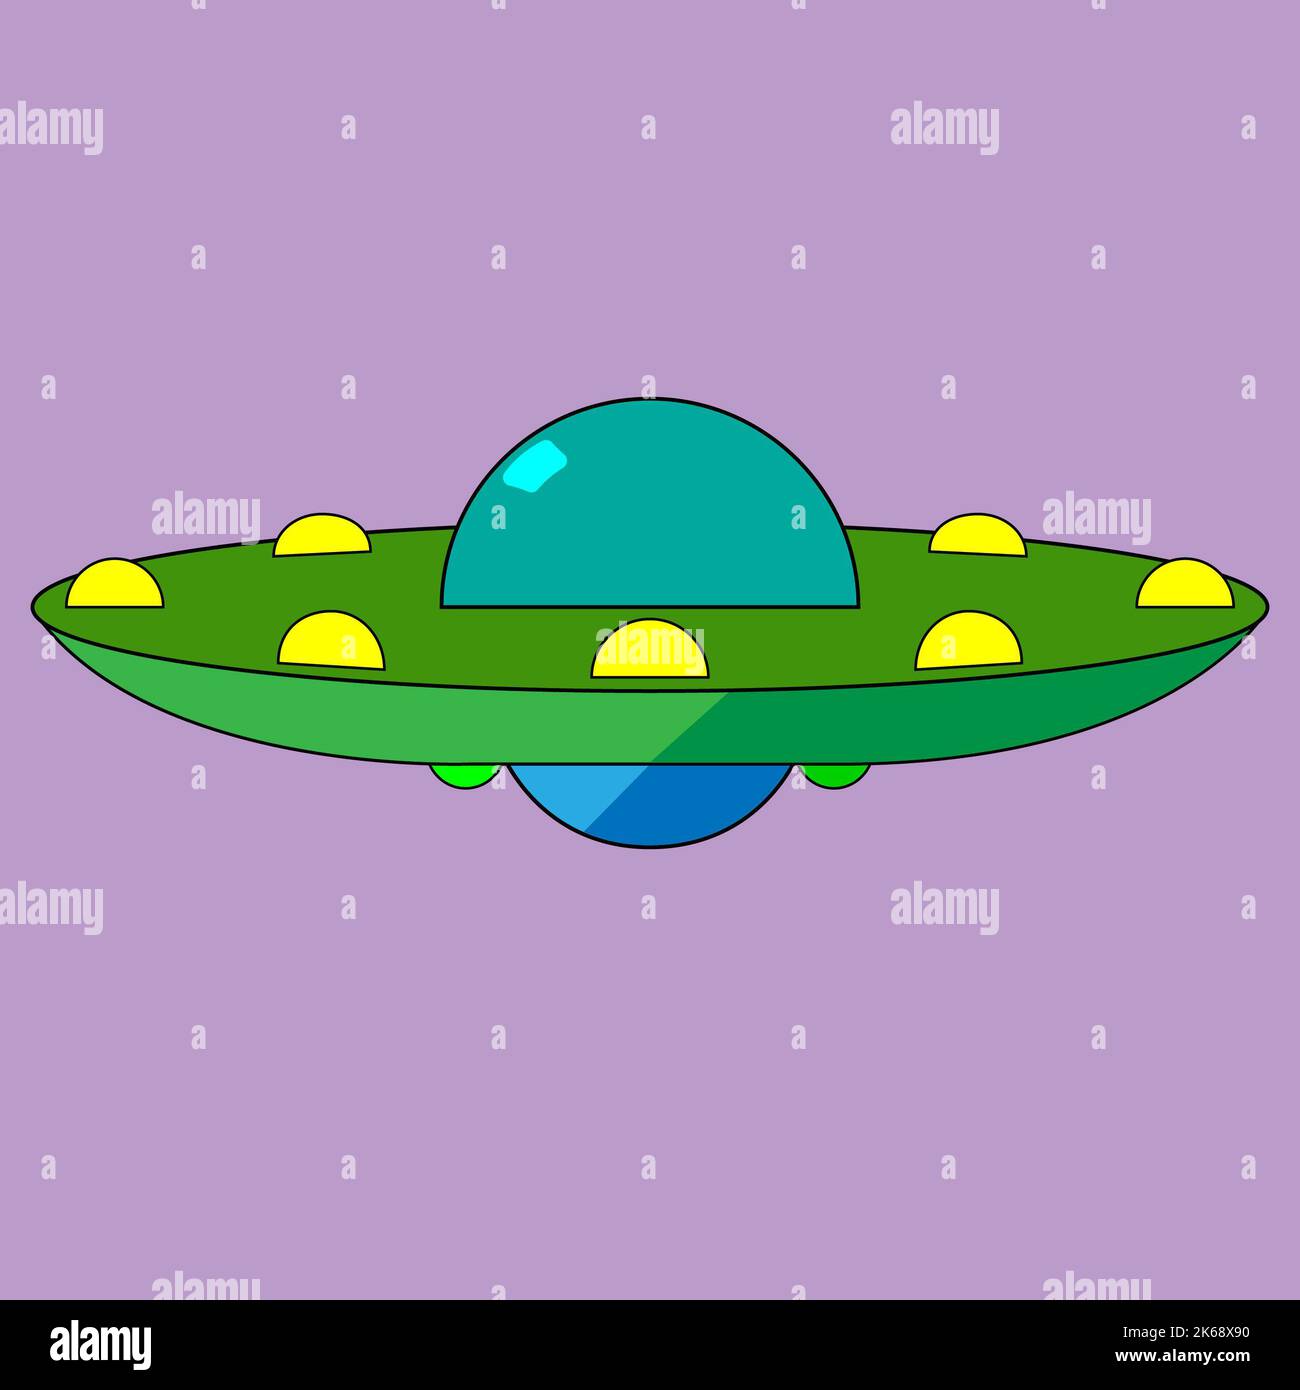 A simple spaceship with lights, ufo, alien vehicle, blue and green and yellow and purple, spaceship illustration, spaceship drawing, space travel Stock Photo